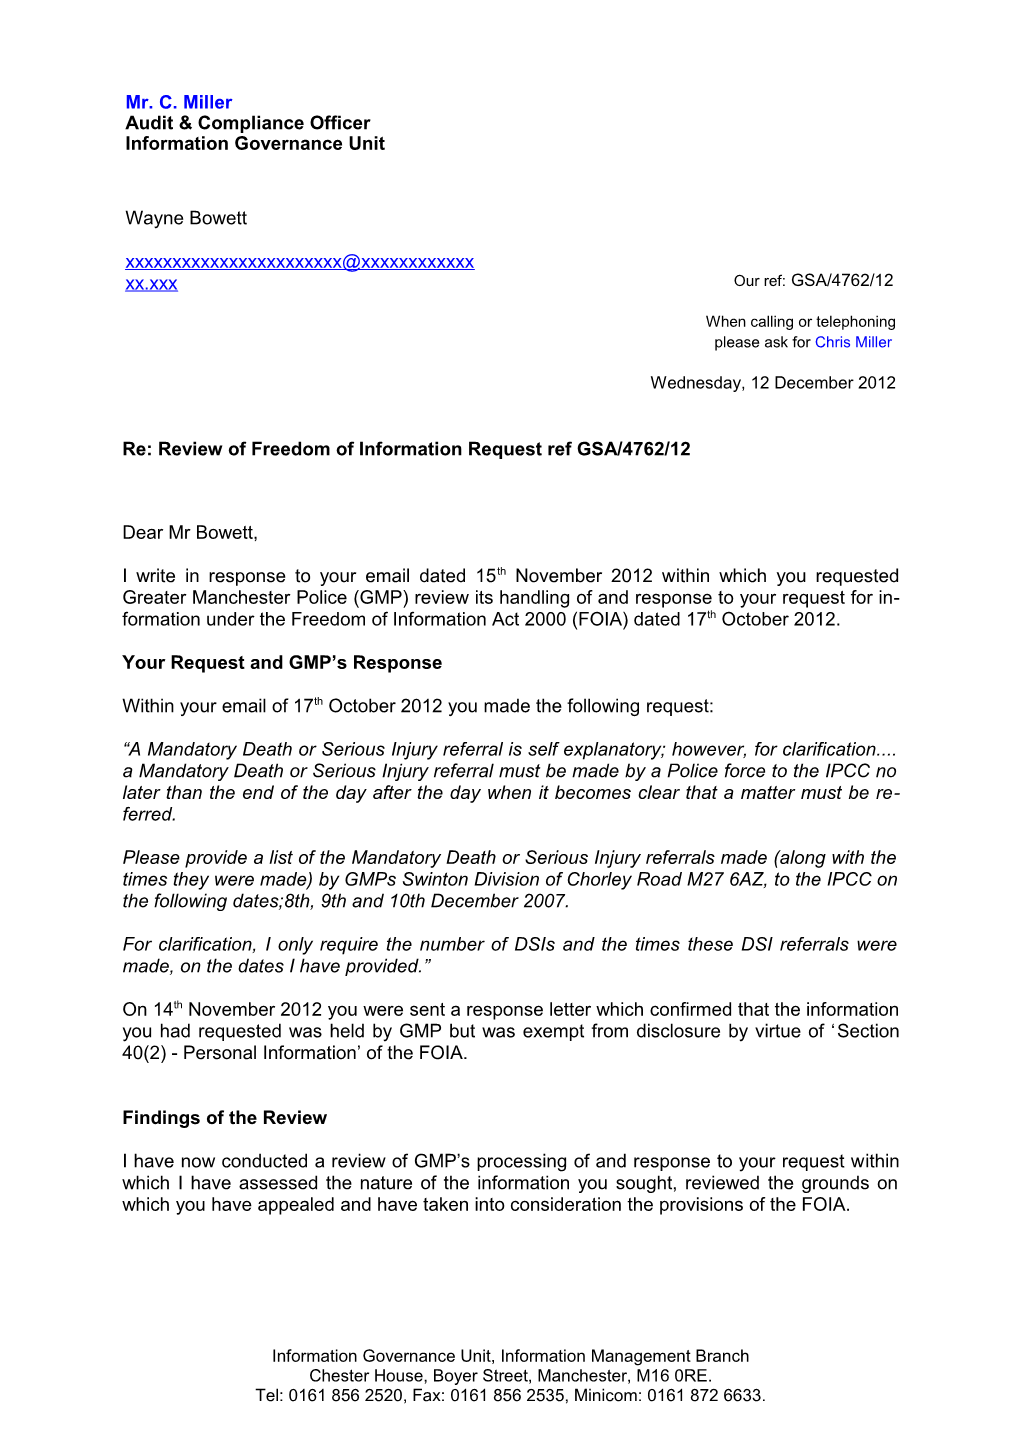 Re: Review of Freedom of Information Request Ref GSA/4762/12